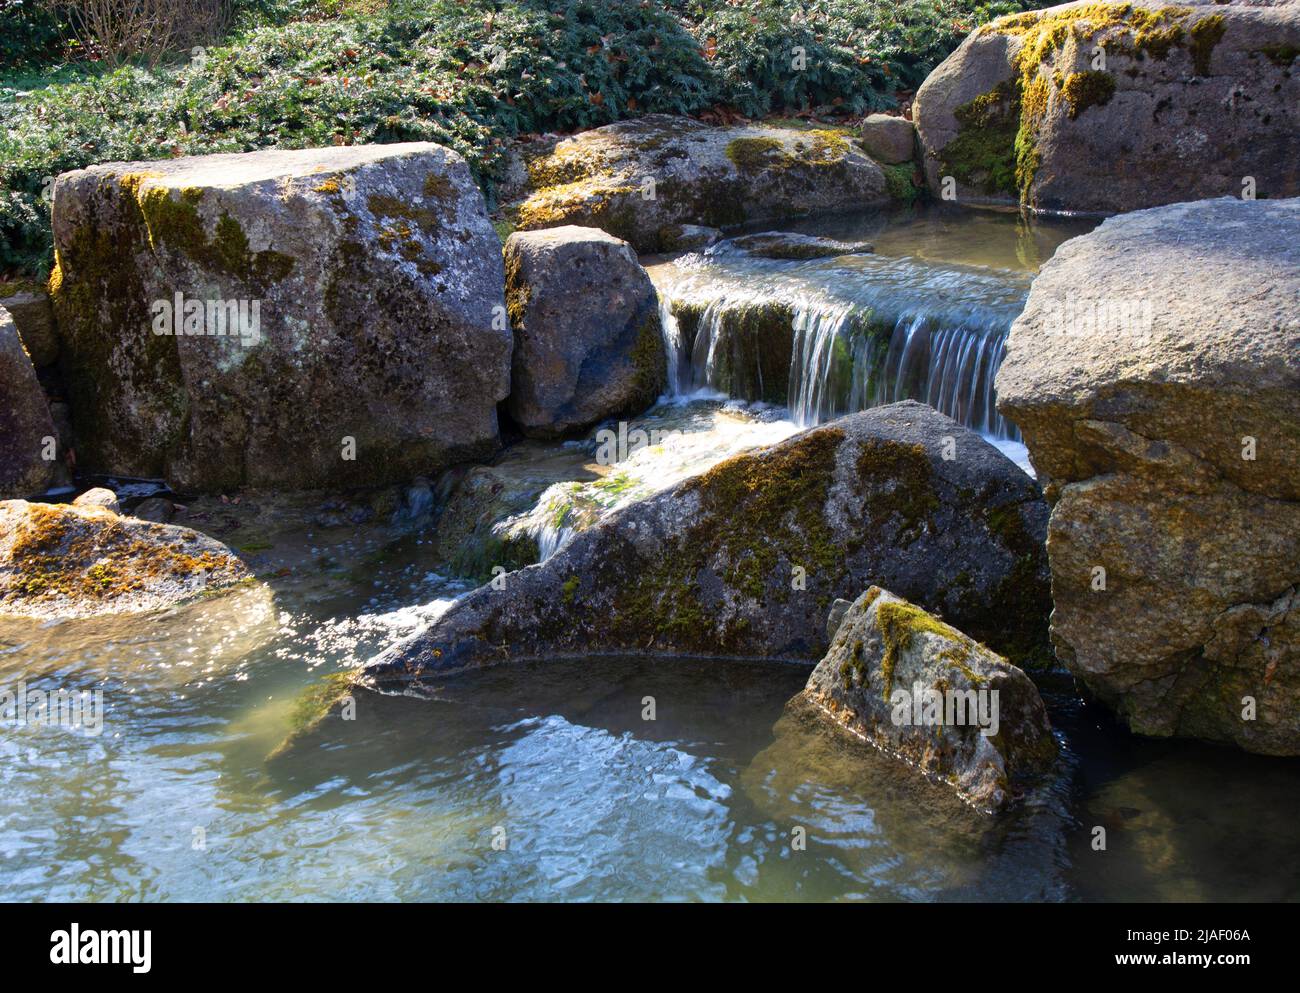 zen garden with a small stream and bubbling little waterfalls Stock Photo